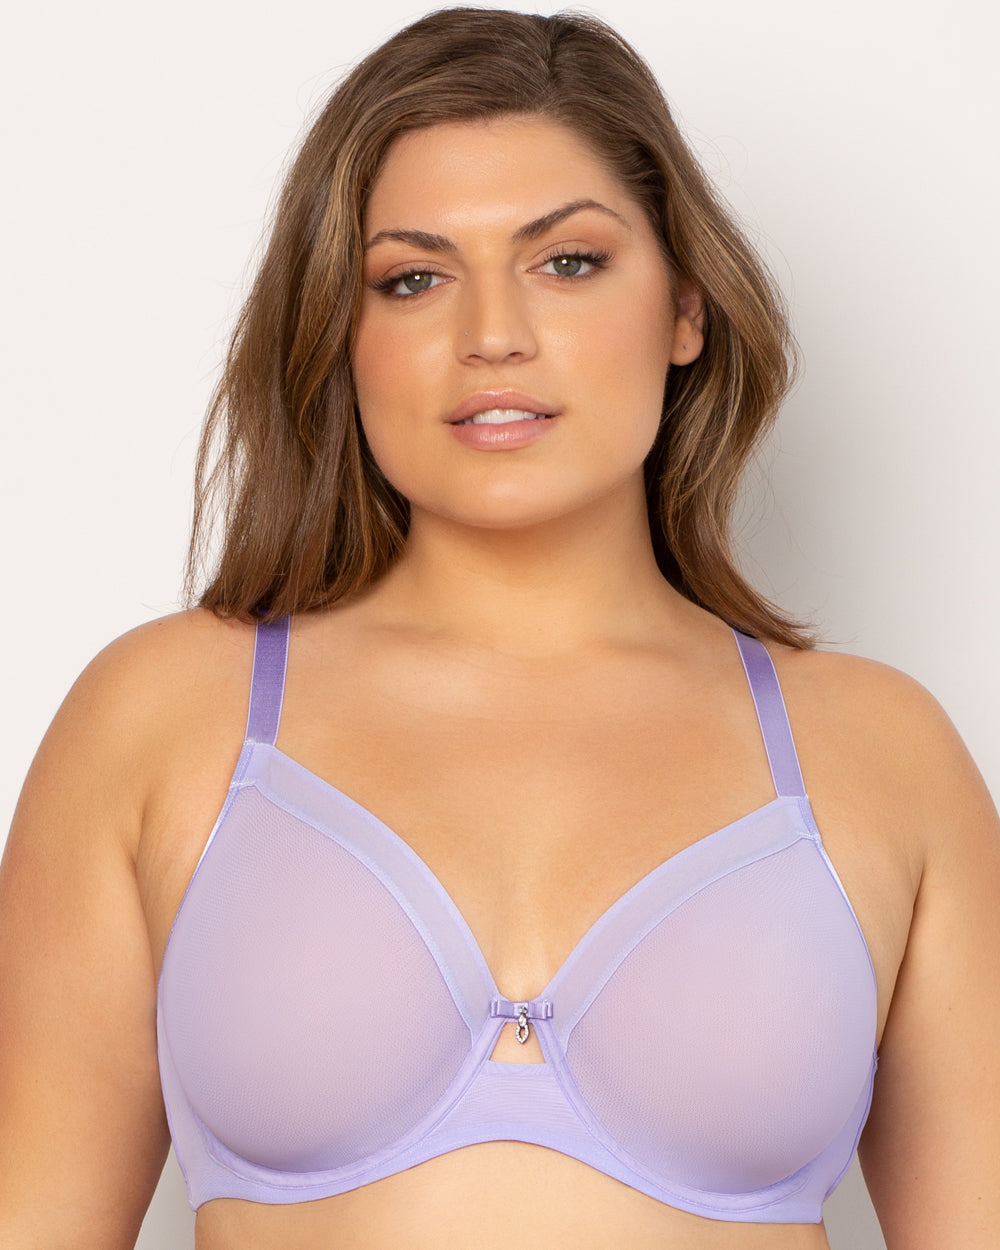 Curvy Couture Women's Sheer Mesh Full Coverage Unlined Underwire Bra  Lavender Mist 46C